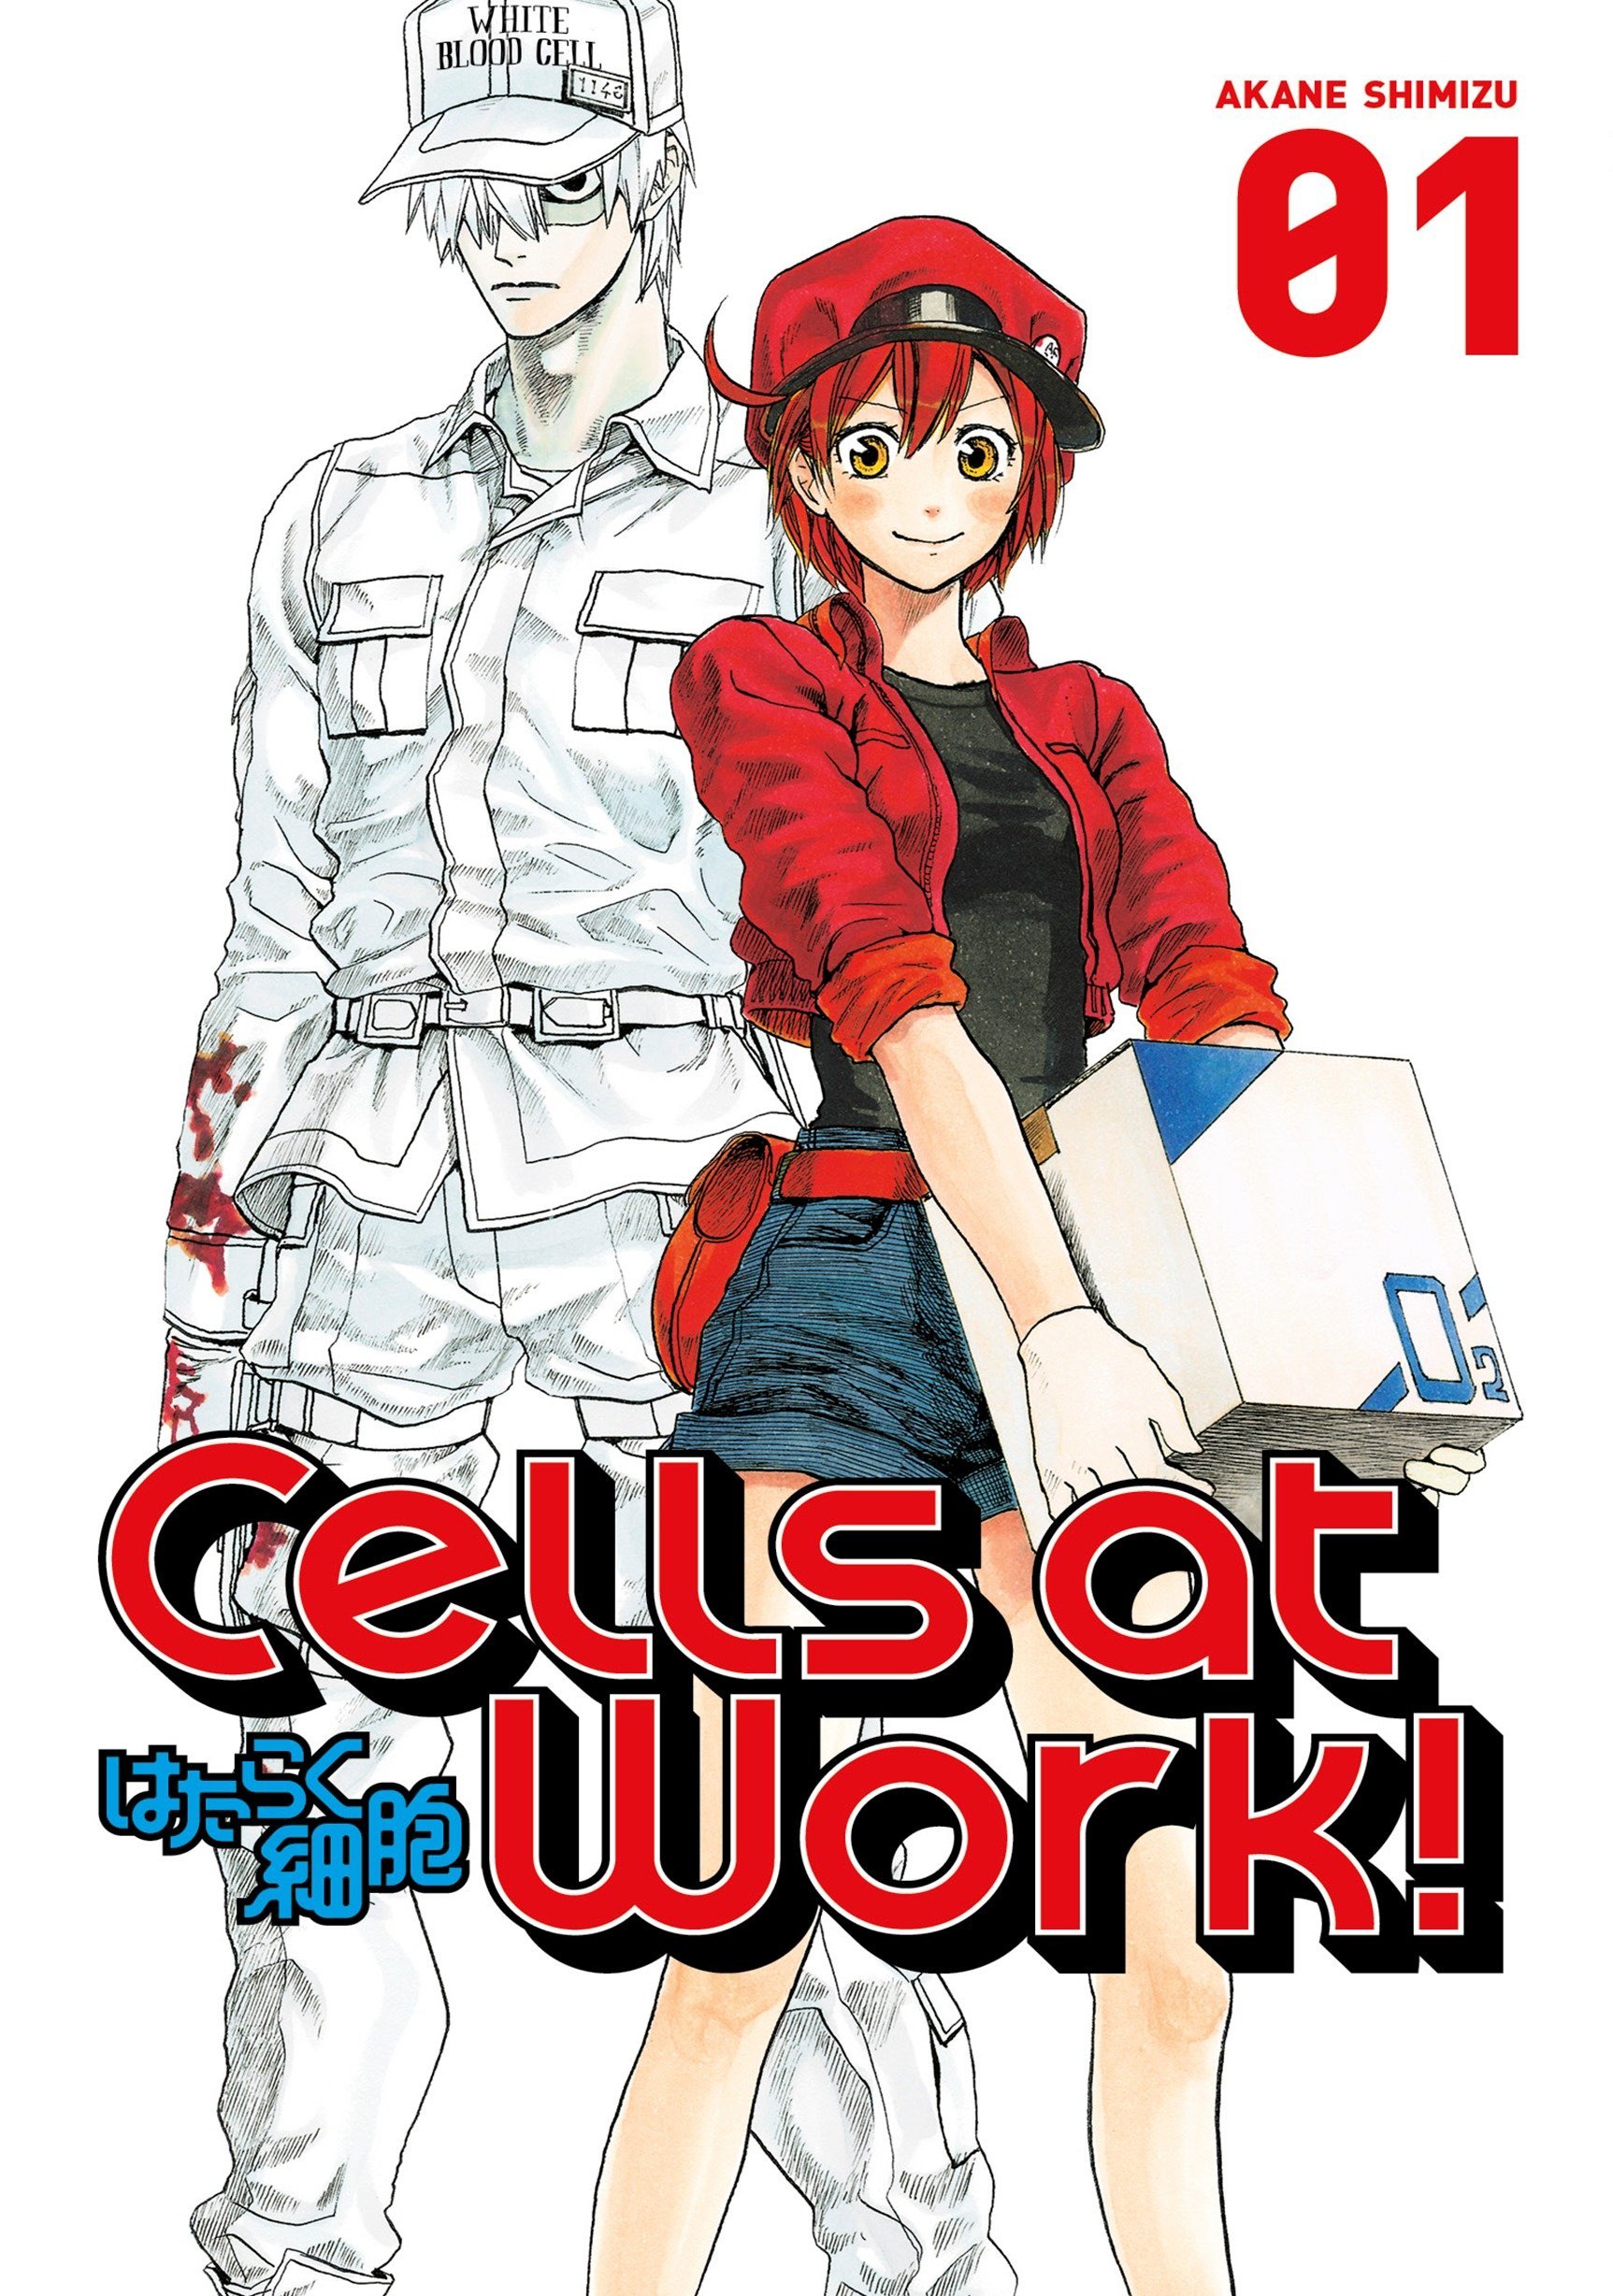 Amazon.com: Anime Cyborgs - Manga Coloring Book for Adults: Android  Technology Collides with Human Biology (Anime & Manga Coloring Books):  9798852862389: Pretty Fantastic Publishing: Books